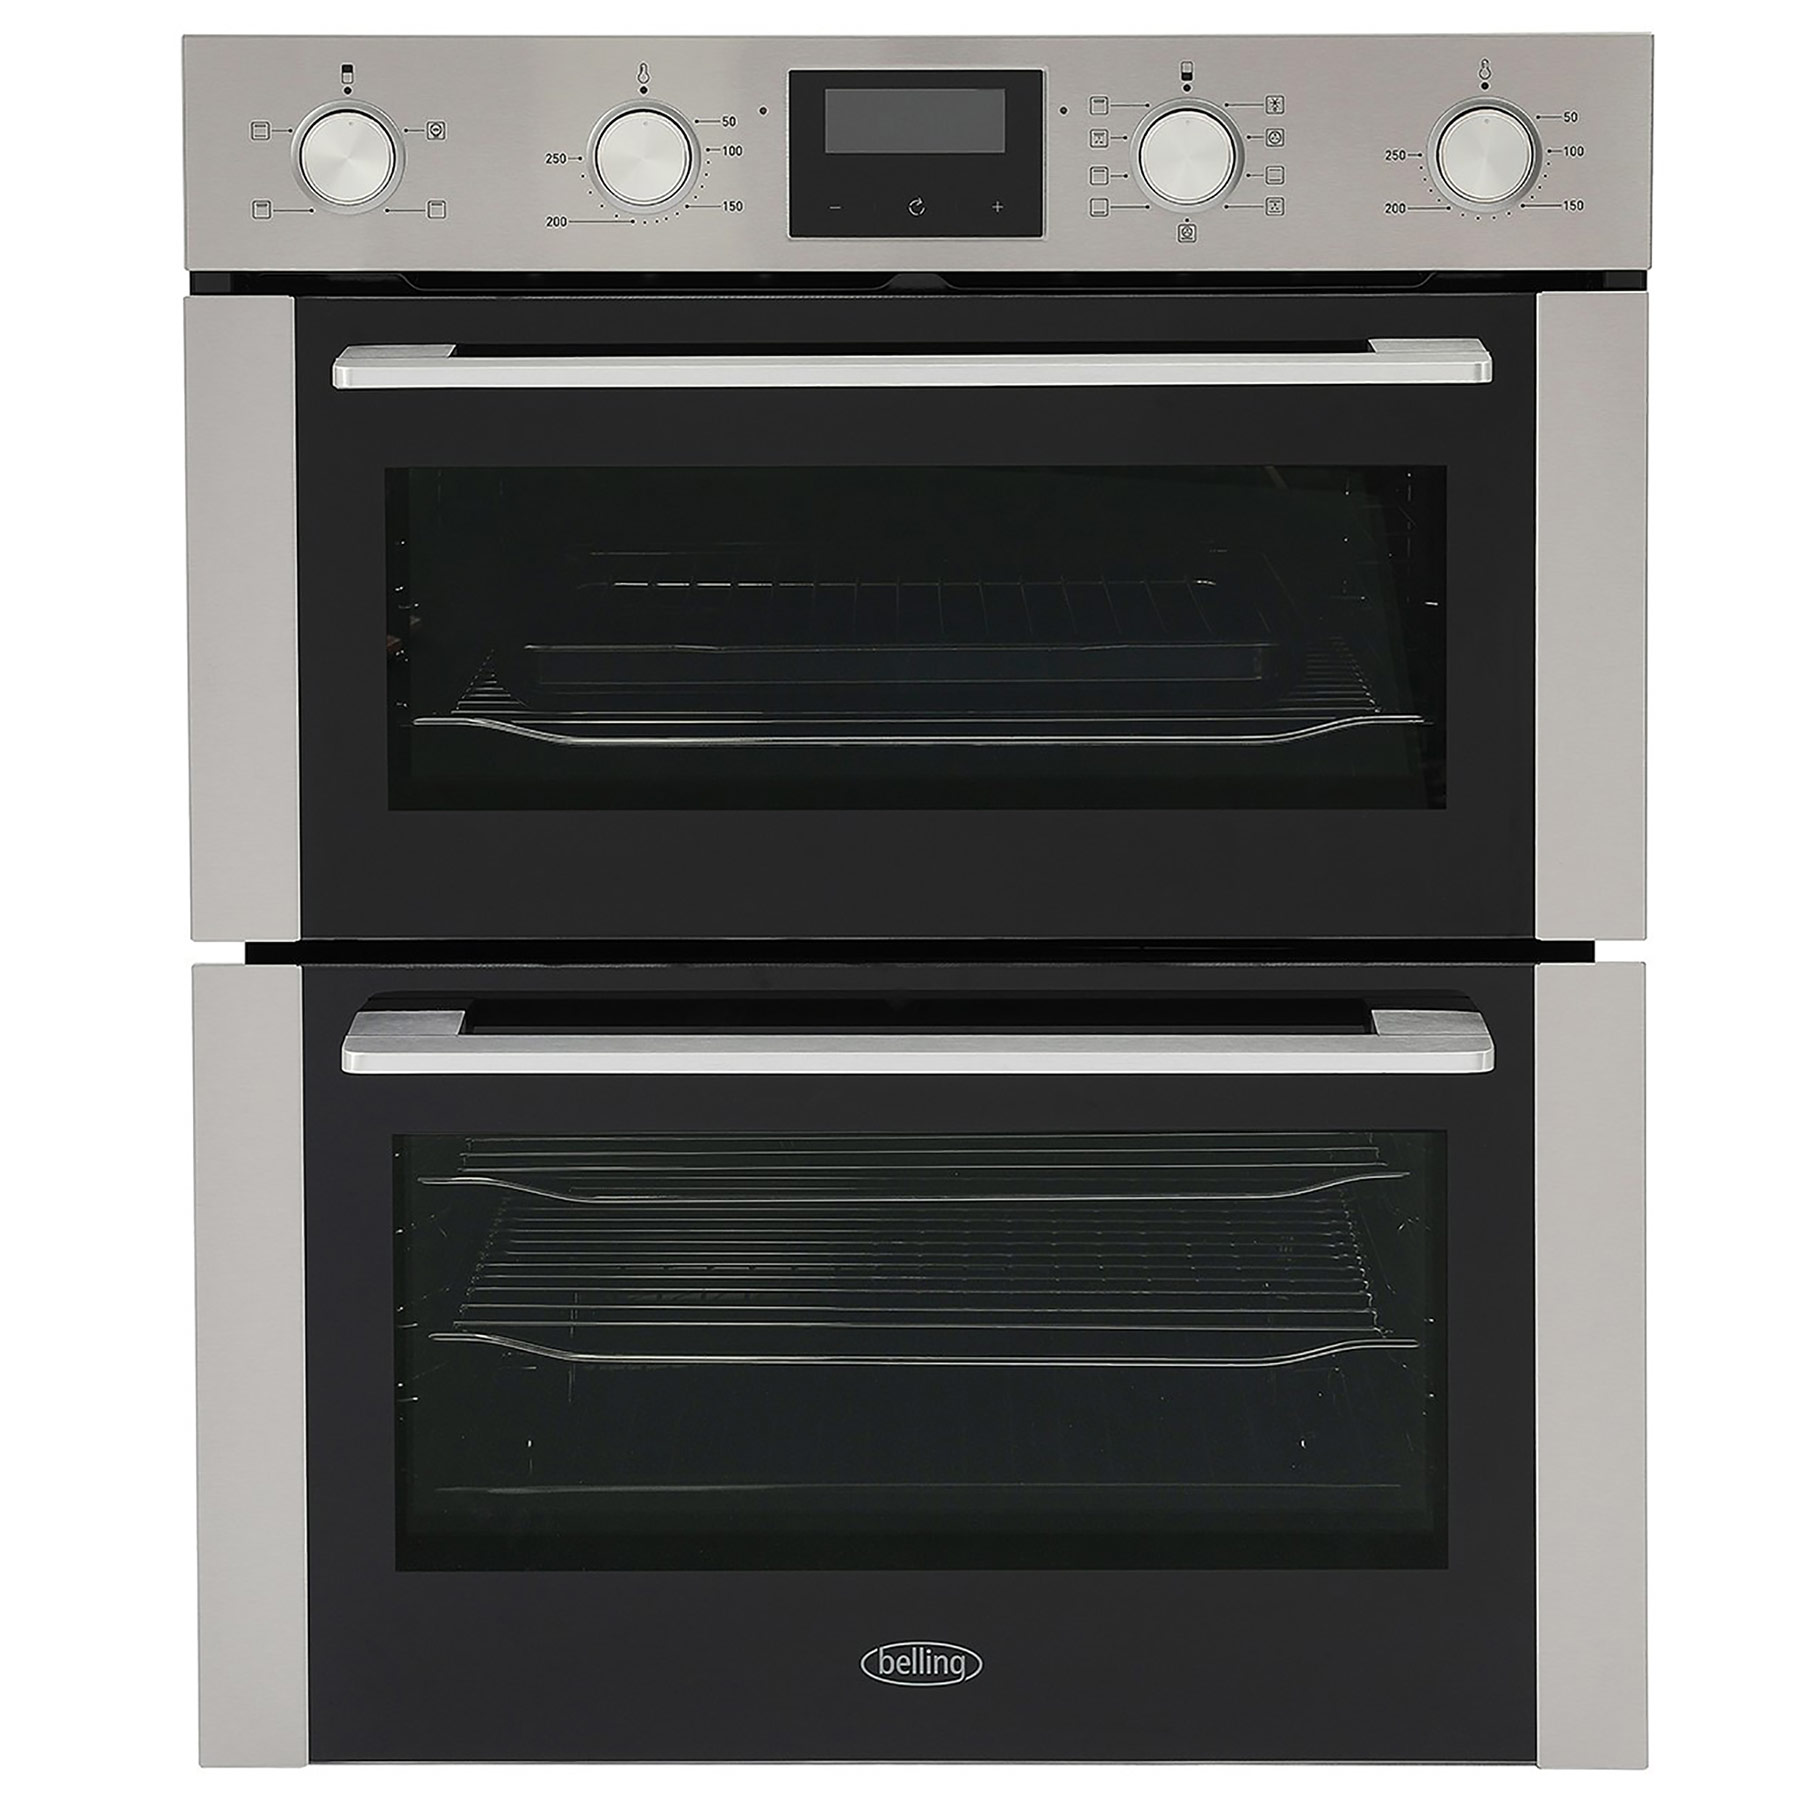 Image of Belling 444411631 70cm Built Under Electric Double Oven Stainless Stee